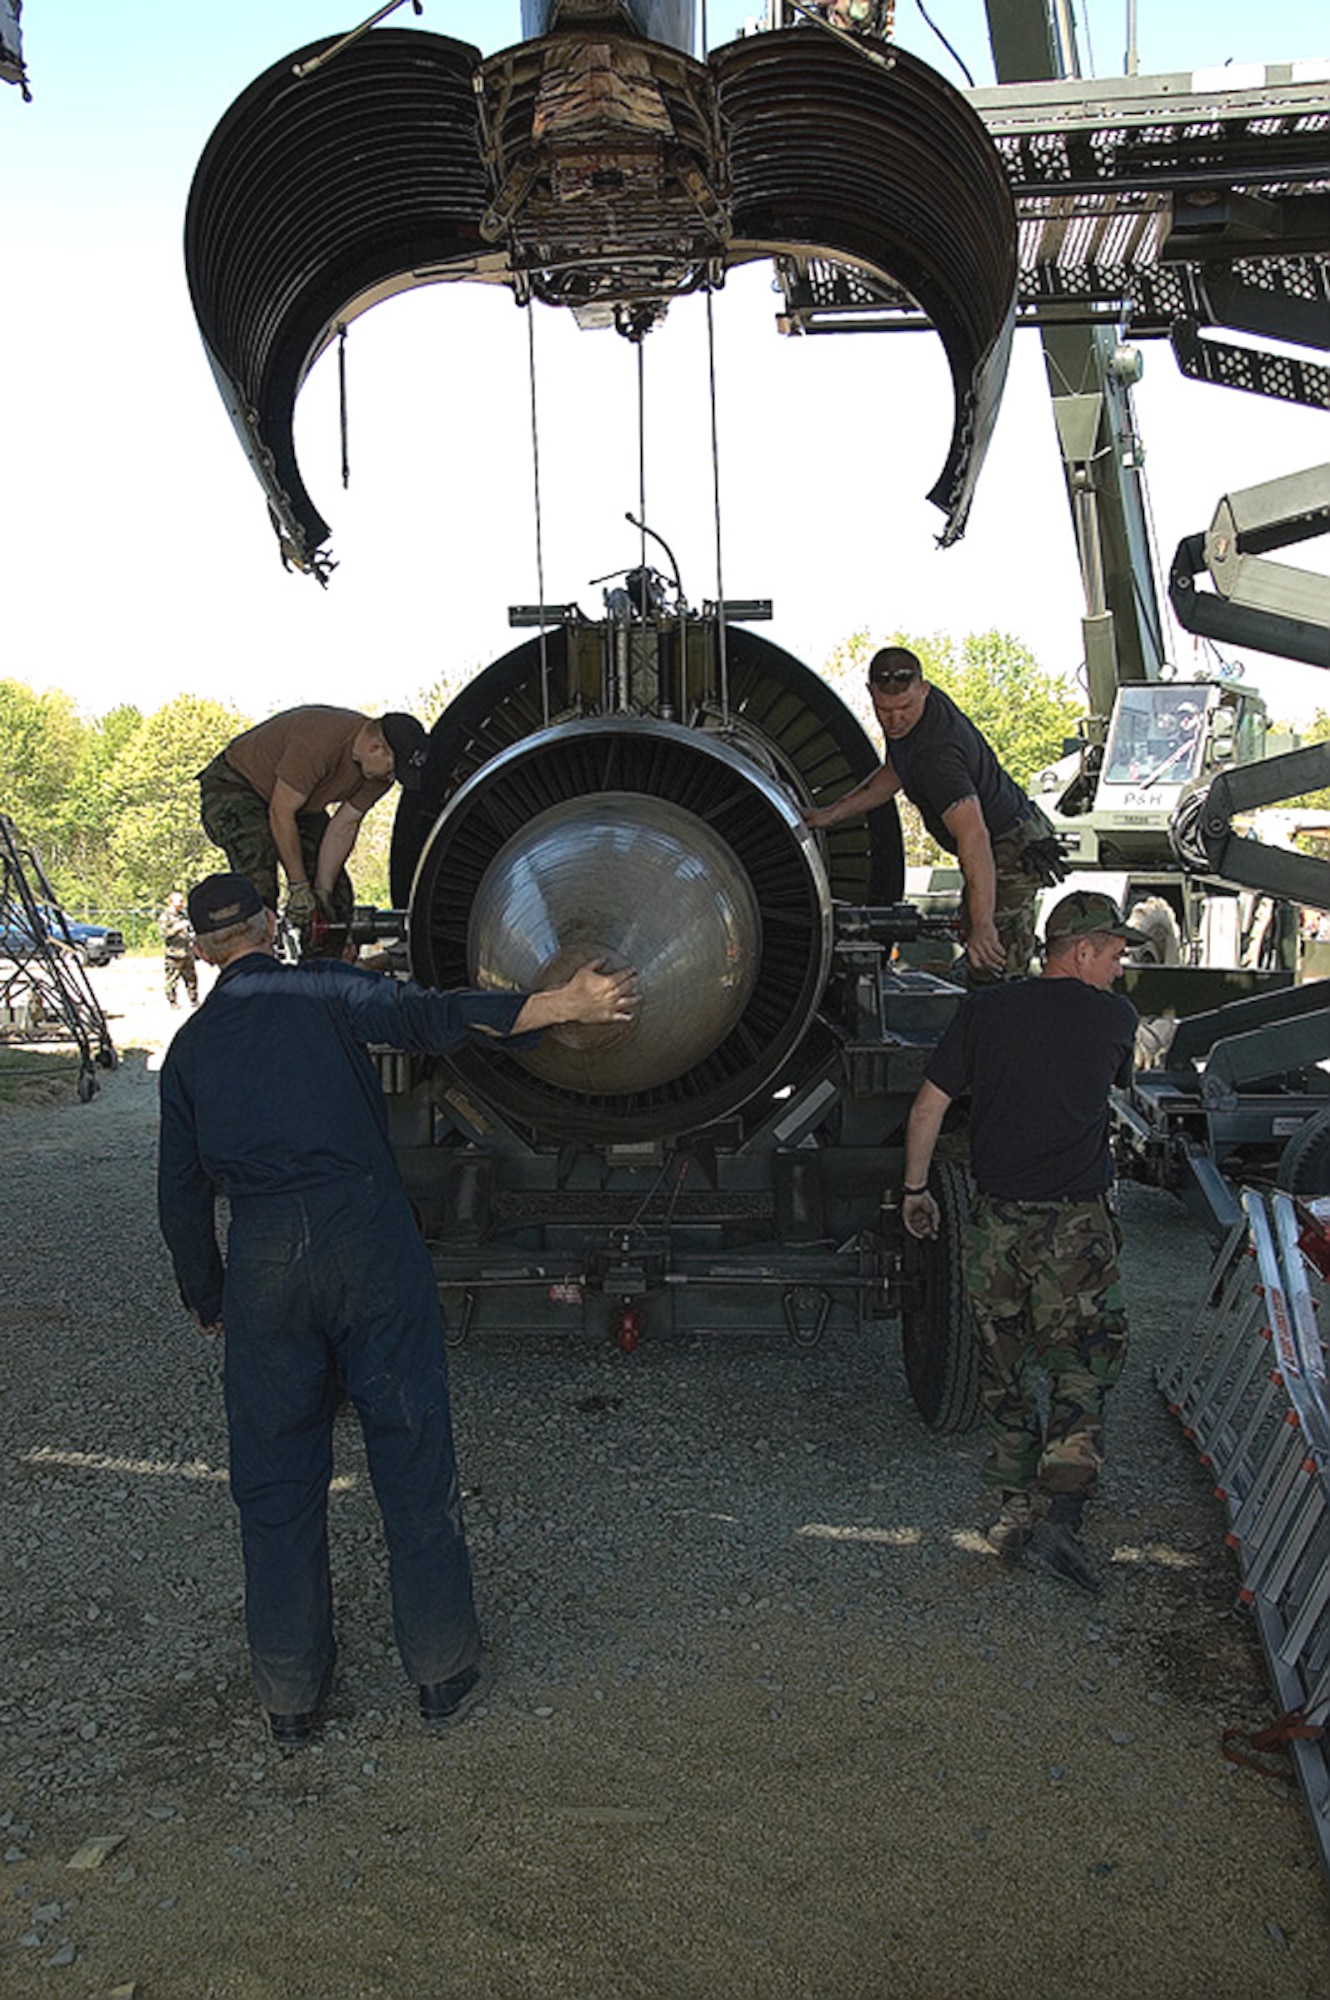 (Clockwise from top left) Staff Sgts. James Leslie and Mark Rose and Tech. Sgts. Peter Magagnotti and Bryan Hooper remove an engine on Friday, April 28, 2006, from the C-5 Galaxy that crashed at Dover Air Force Base, Del., April 3. Although the engine is off the plane, it will remain at the site along with the other parts until cleared for release by the accident investigation board. Sergeants Leslie and Hooper are with the 512th Component Maintenance Squadron. Sergeants Rose and Magagnotti are with the 436th Maintenance Squadron. (U.S. Air Force photo/Roland Balik)